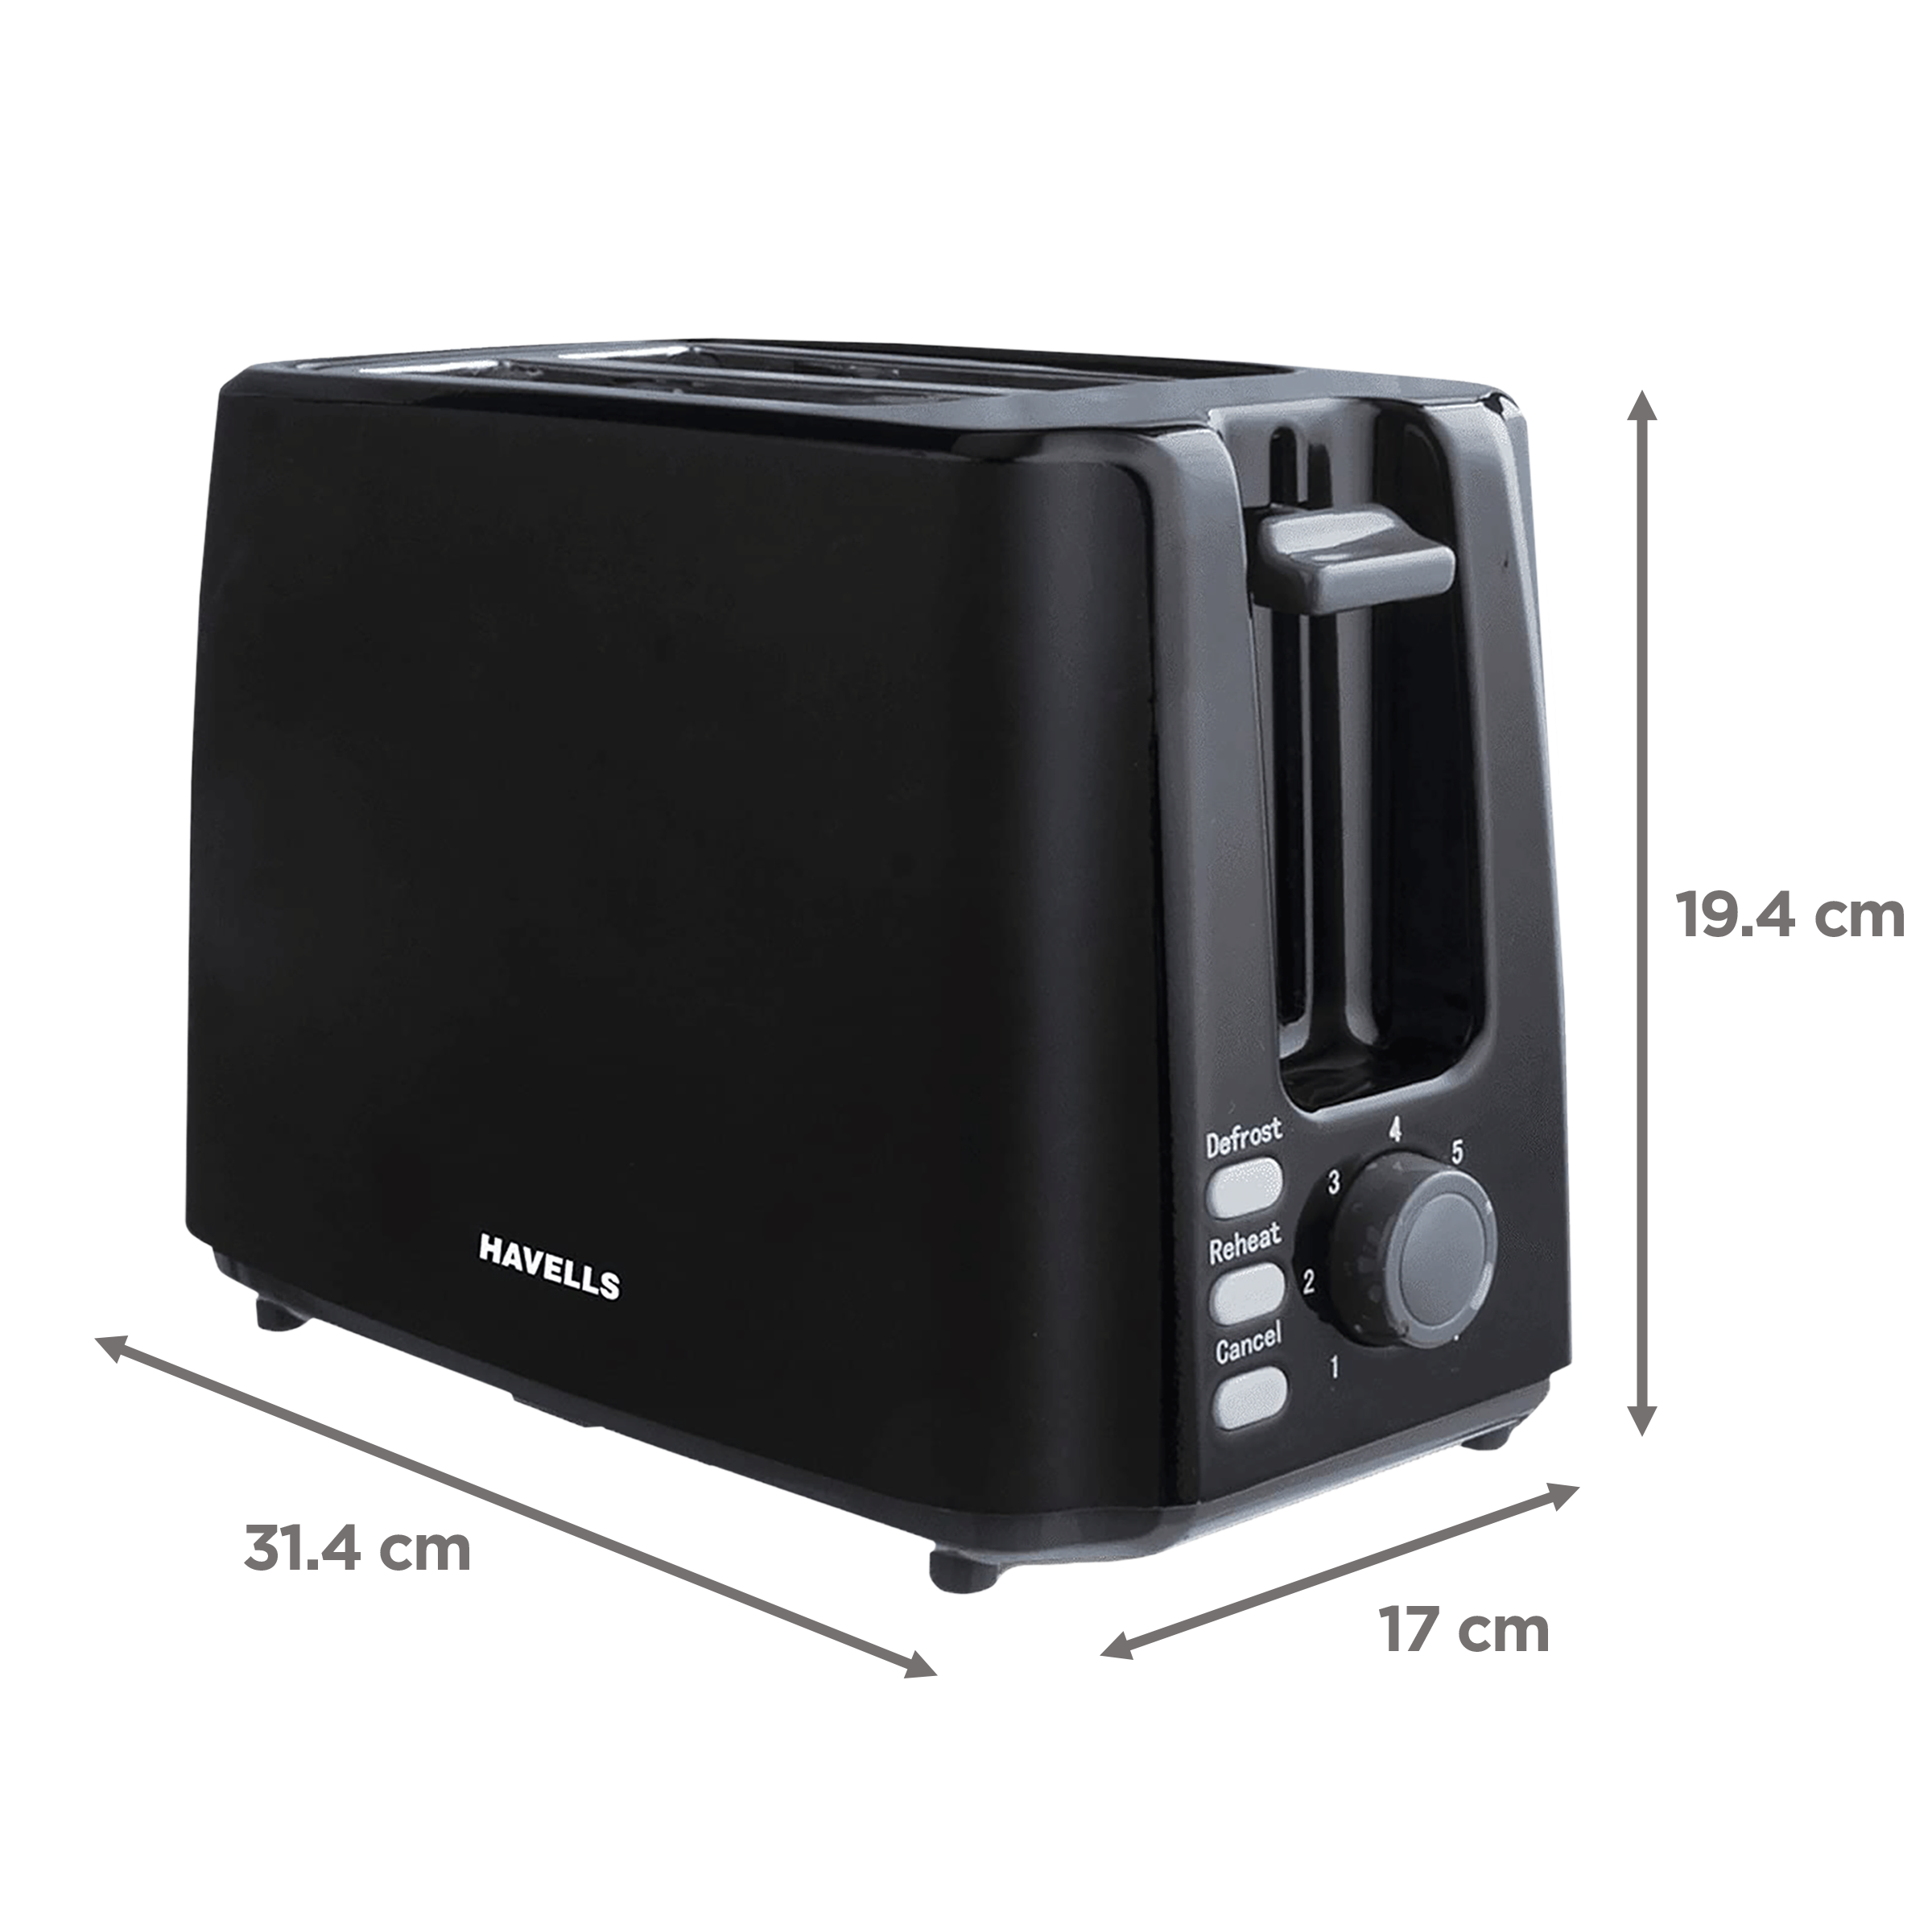 Havells Crisp Plus 750 Watts 2 Slice Automatic Pop-up Toaster (7 Heat Setting With Electronic Variable Browning, GHCPTCJK075, Black)_2